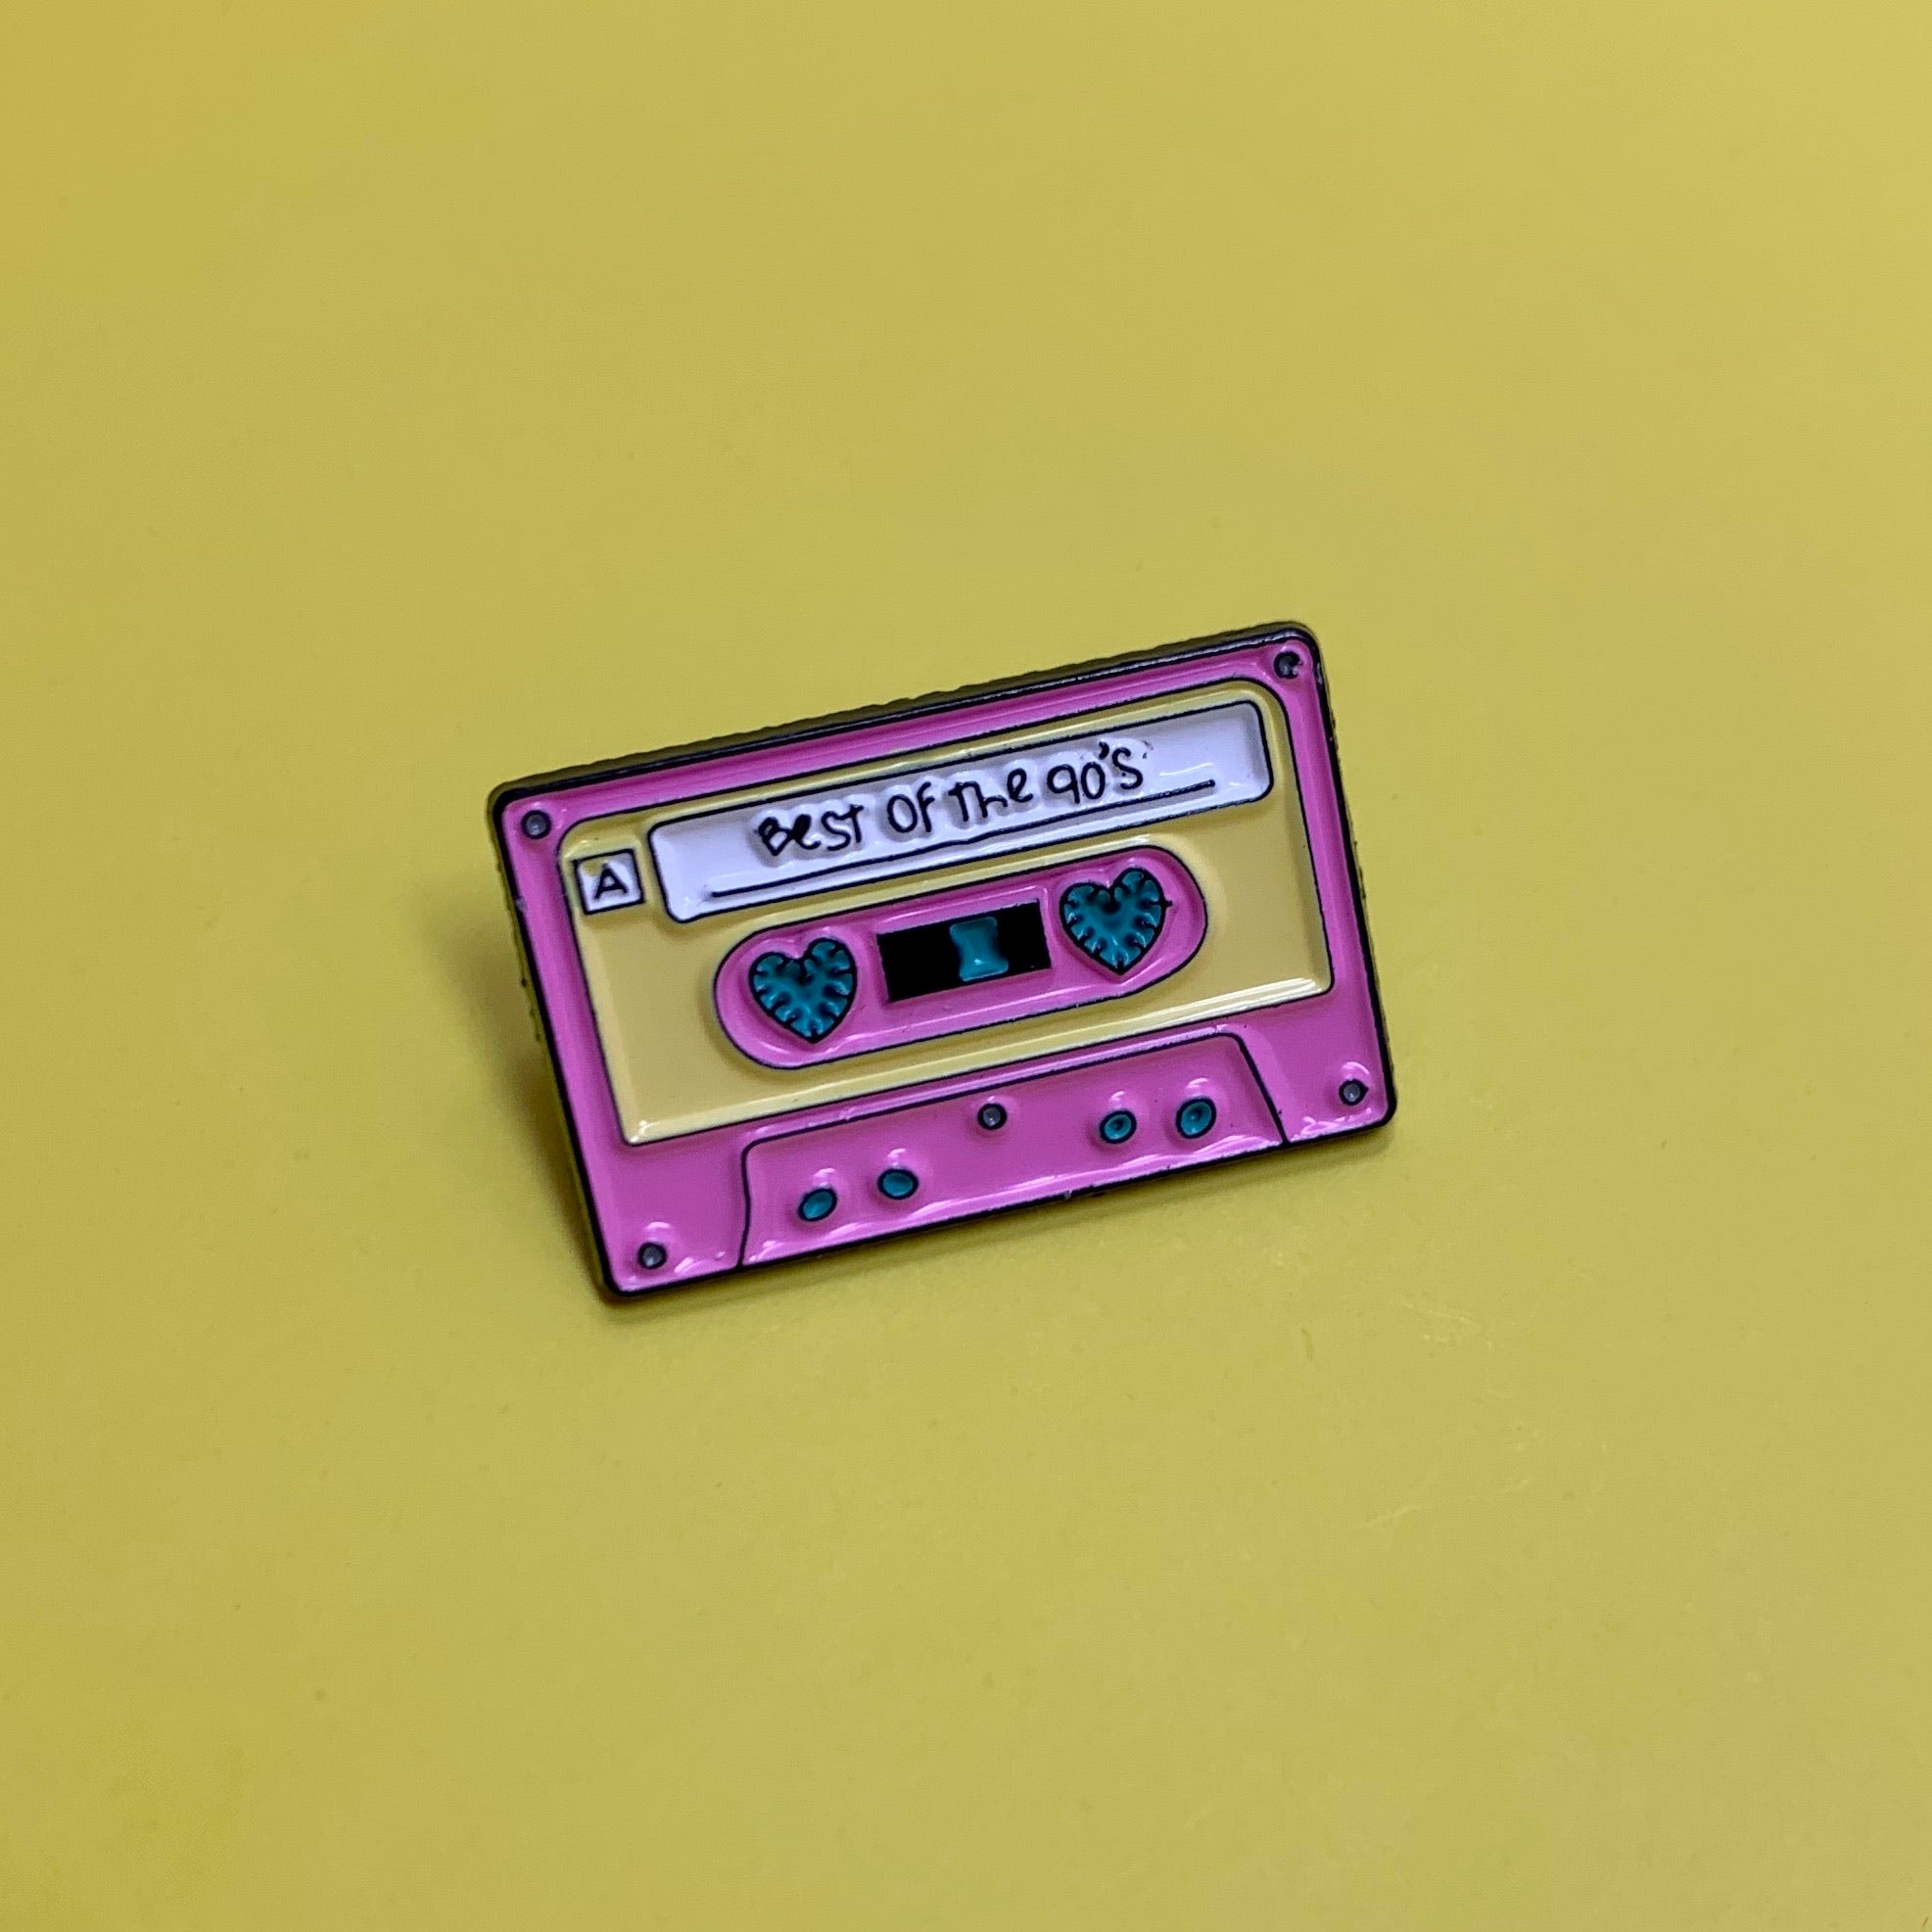 BEST OF THE 90'S MIX TAPE PIN